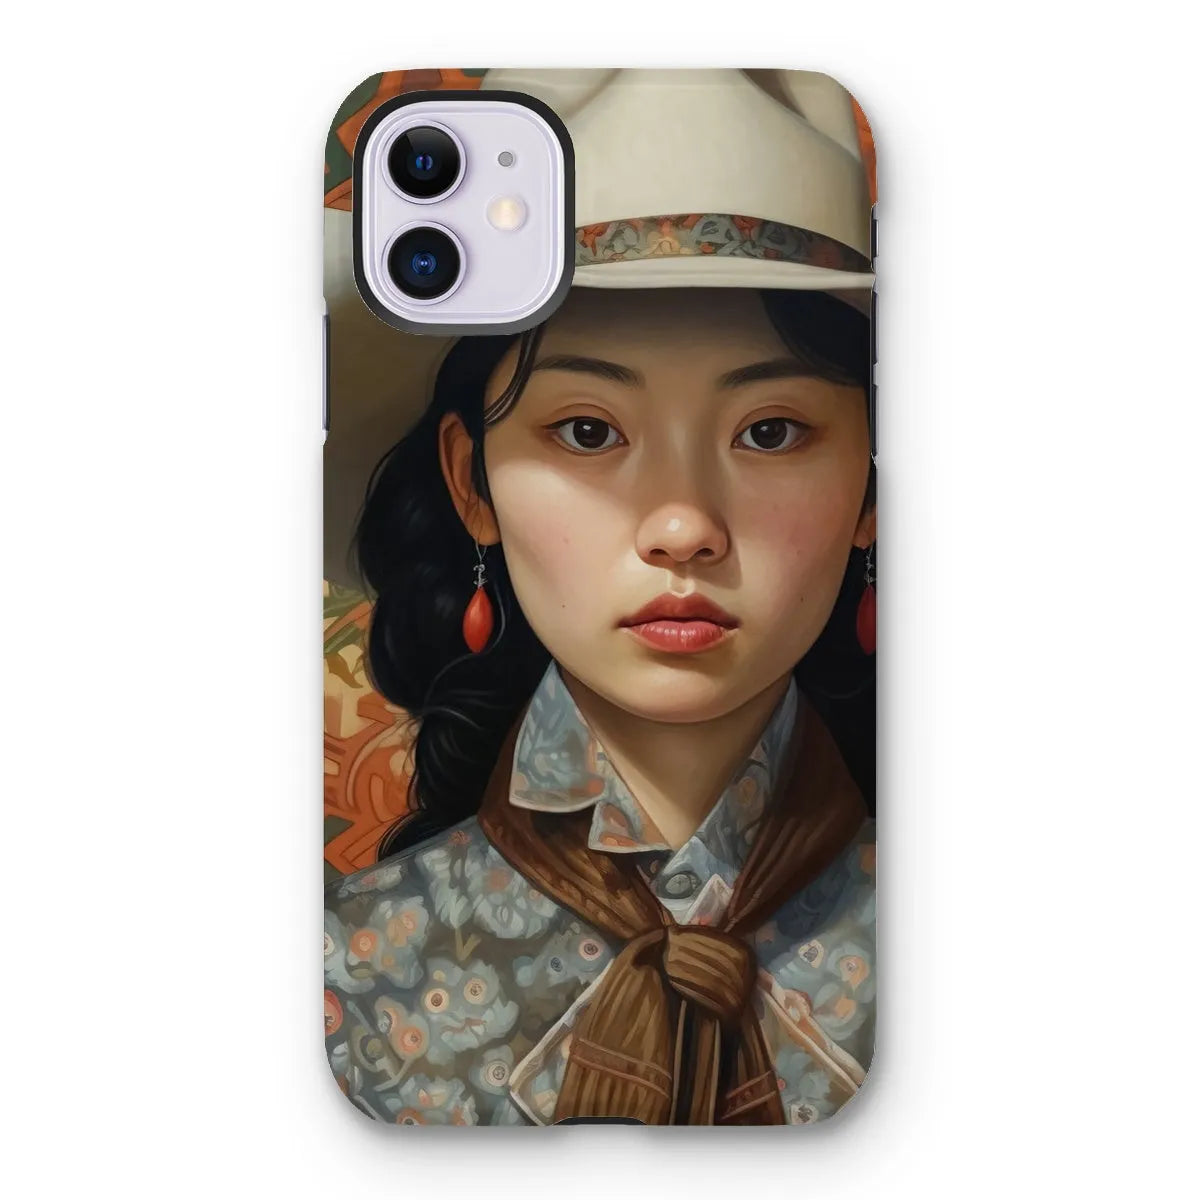 Zhi The Lesbian Cowgirl - Sapphic Art Phone Case - Iphone 11 / Matte - Mobile Phone Cases - Aesthetic Art